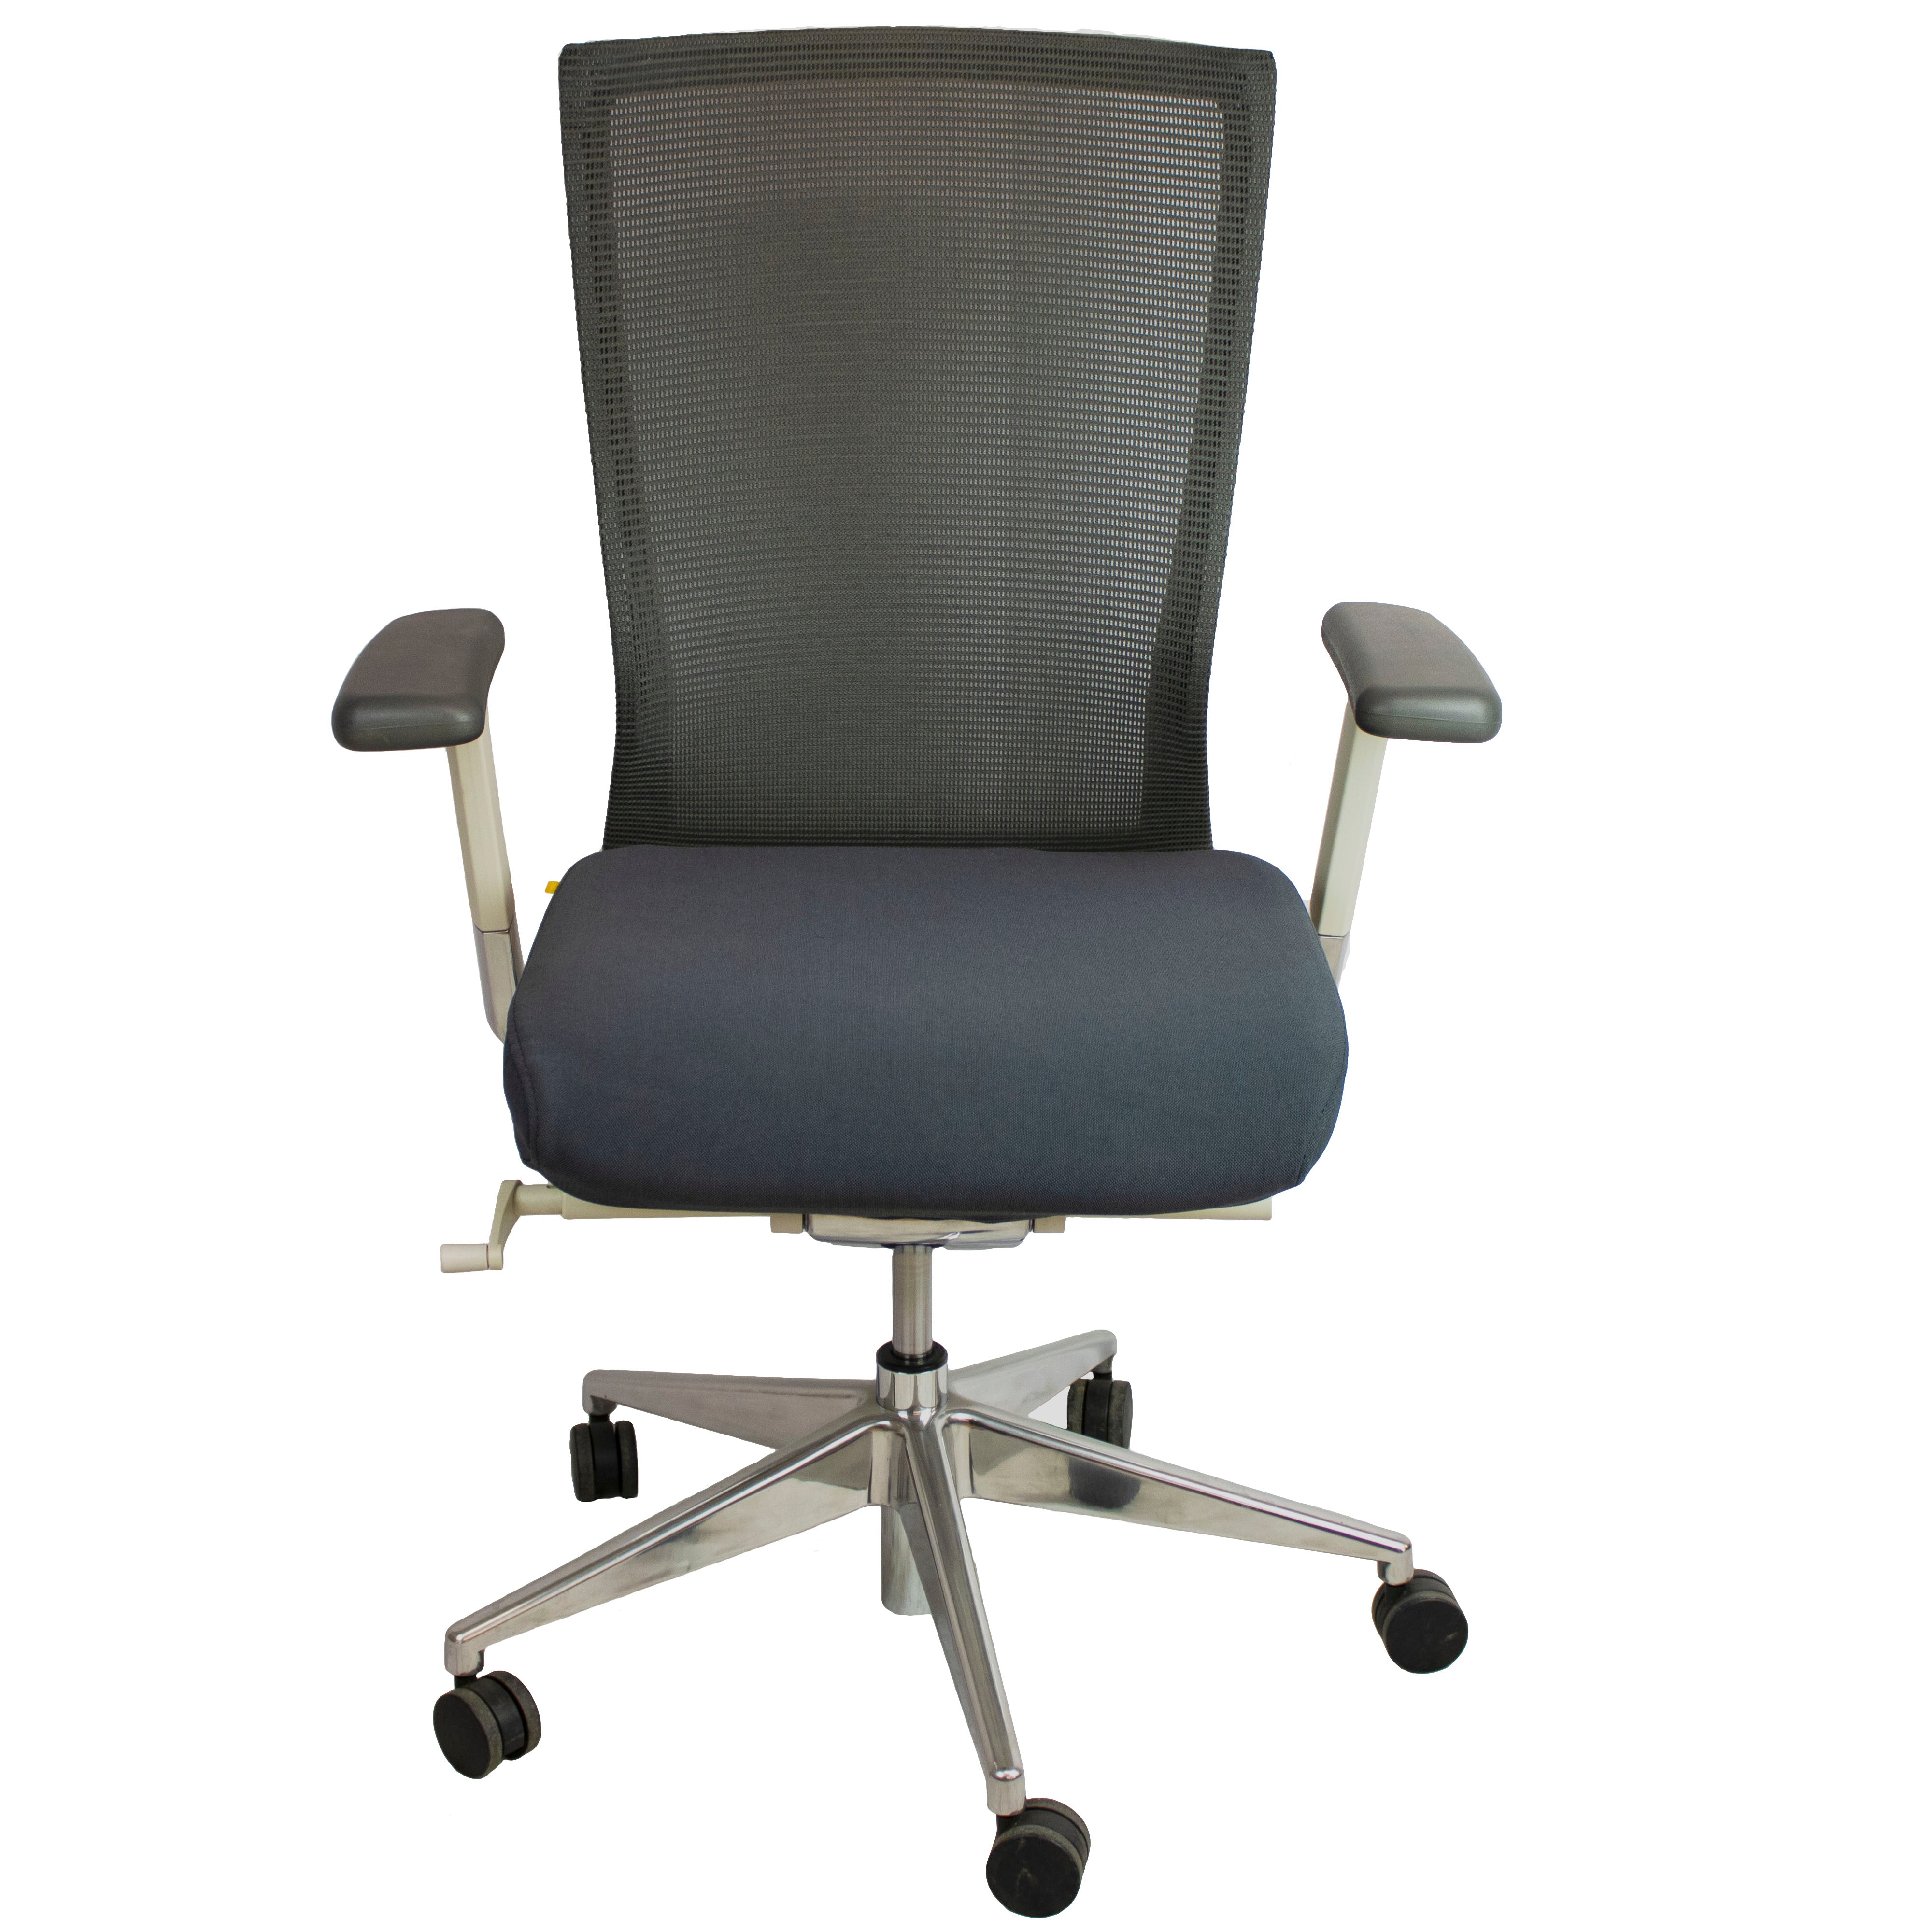 iDesk Oroblanco Task Chair with Interchangeable Cushion - Preowned